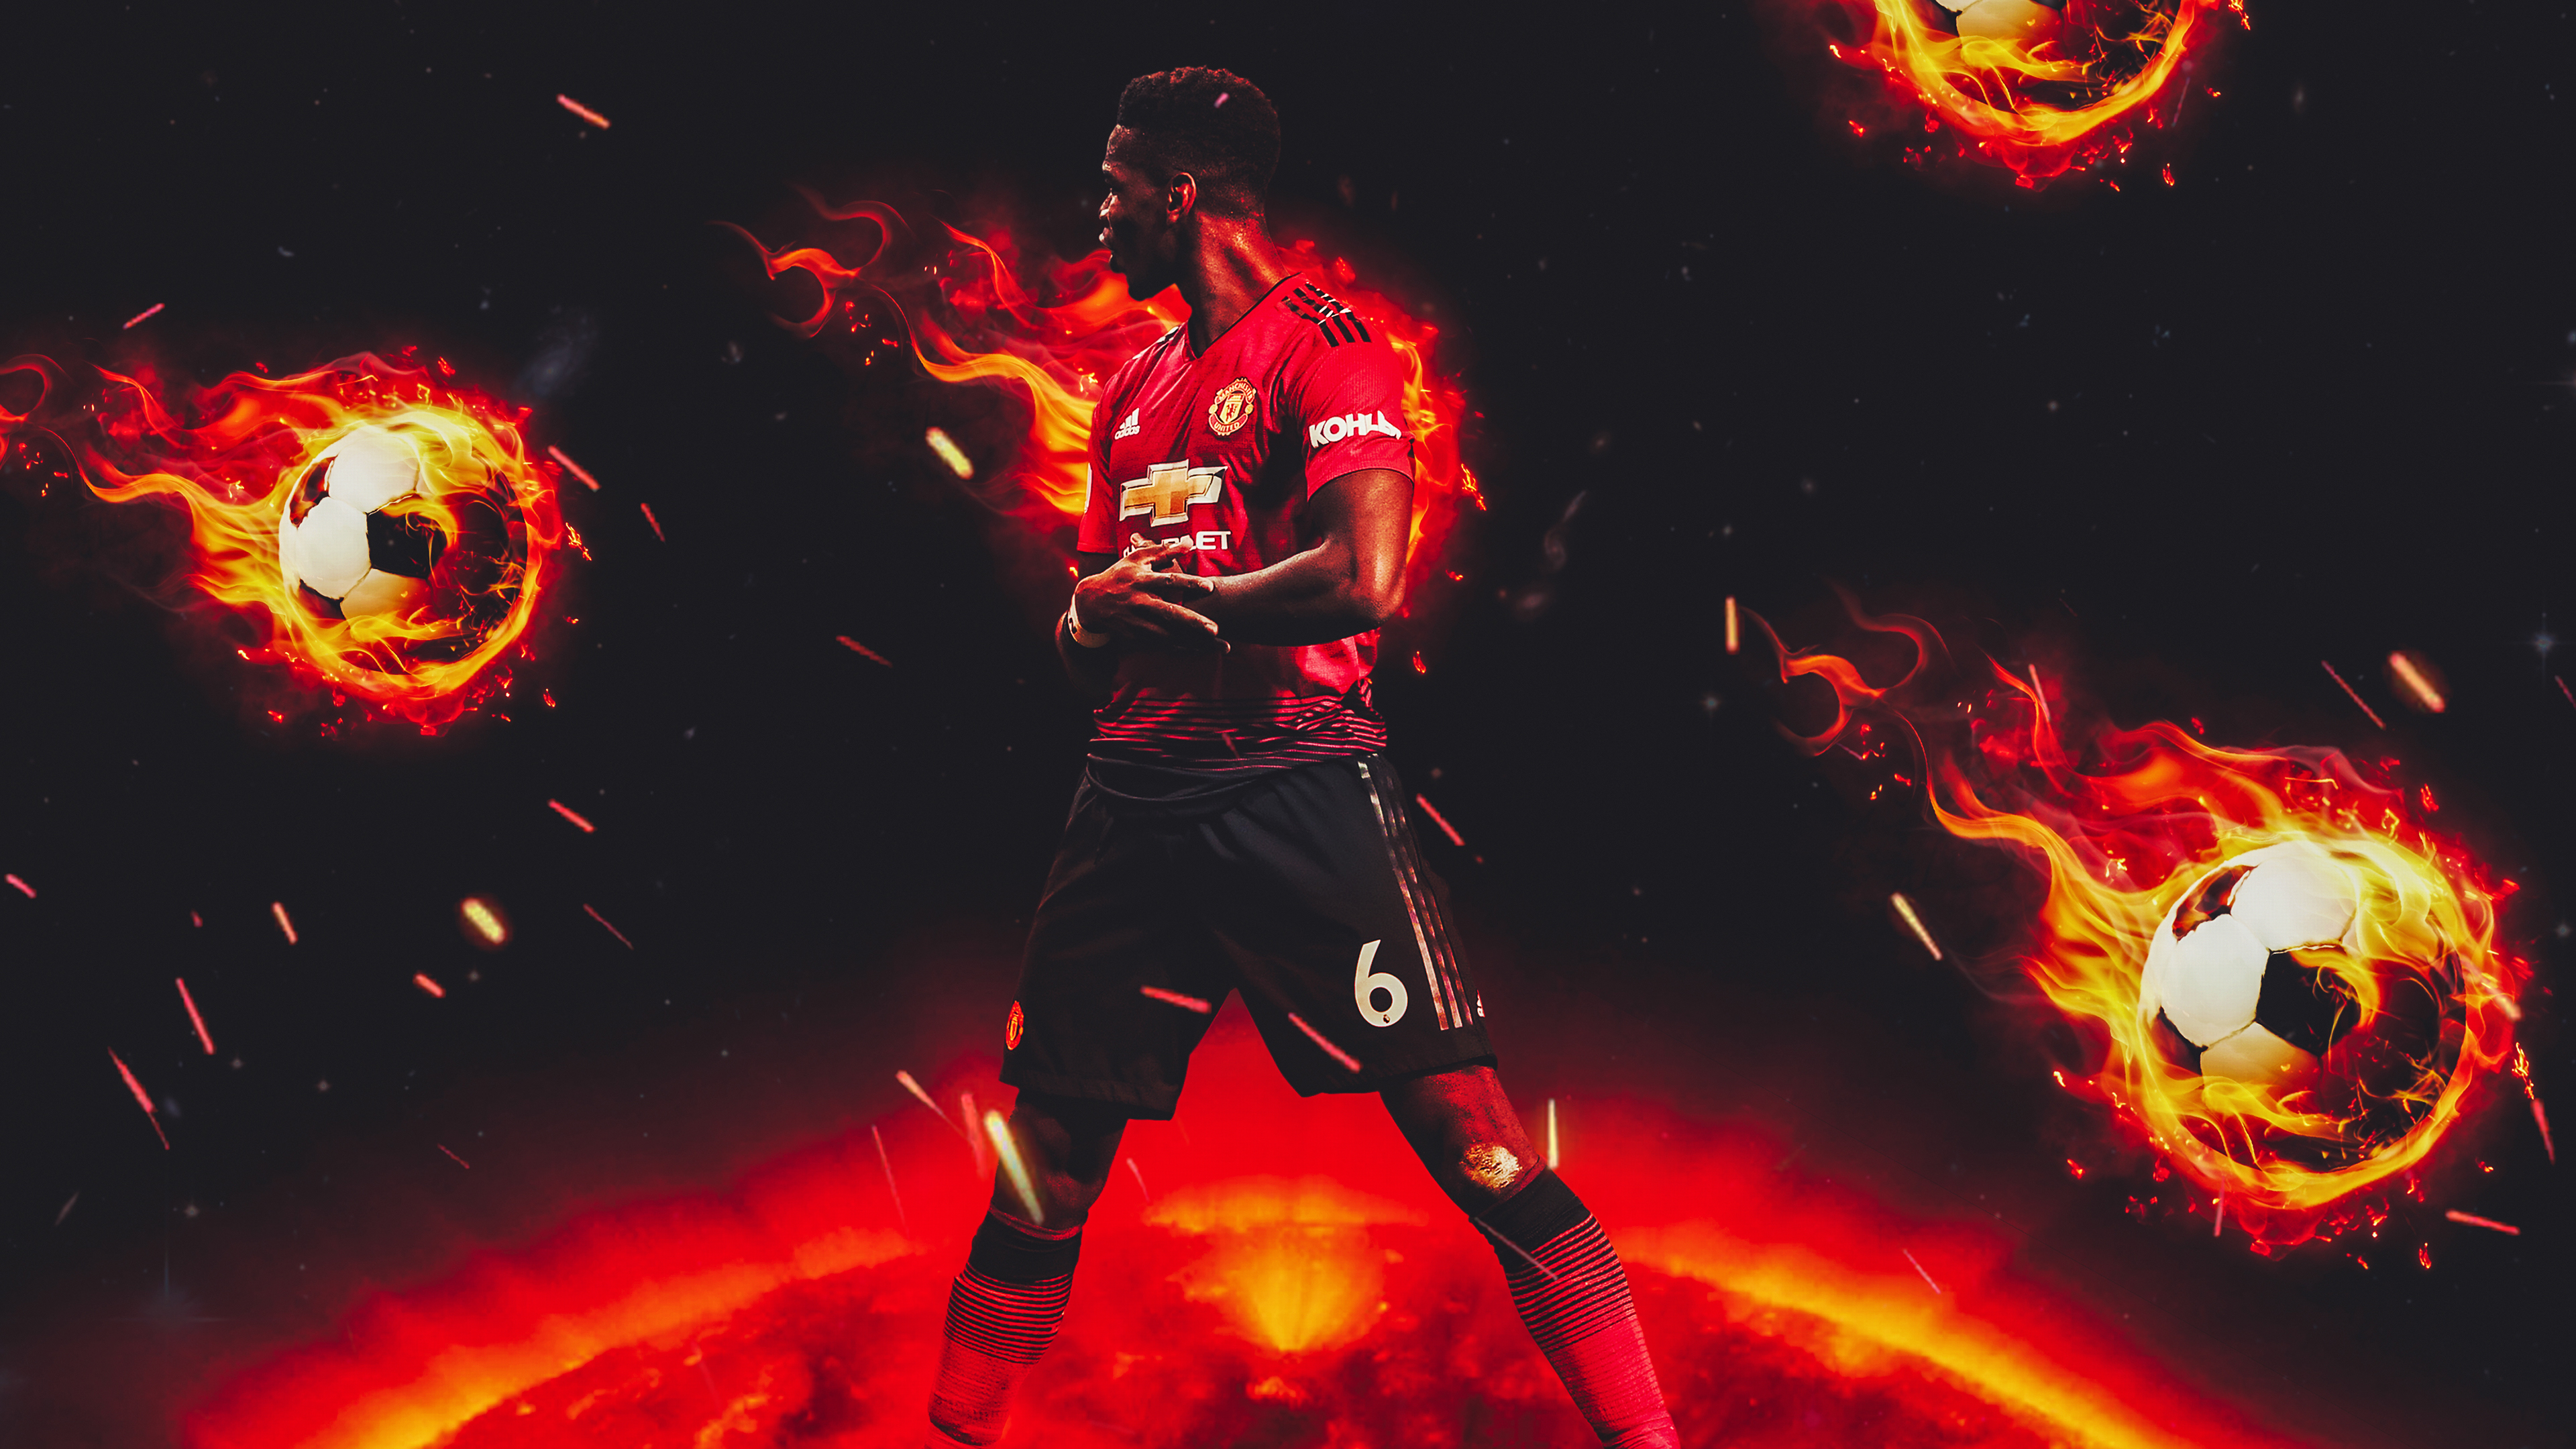 12 Newest Manchester united 4k iphone wallpaper with photos 